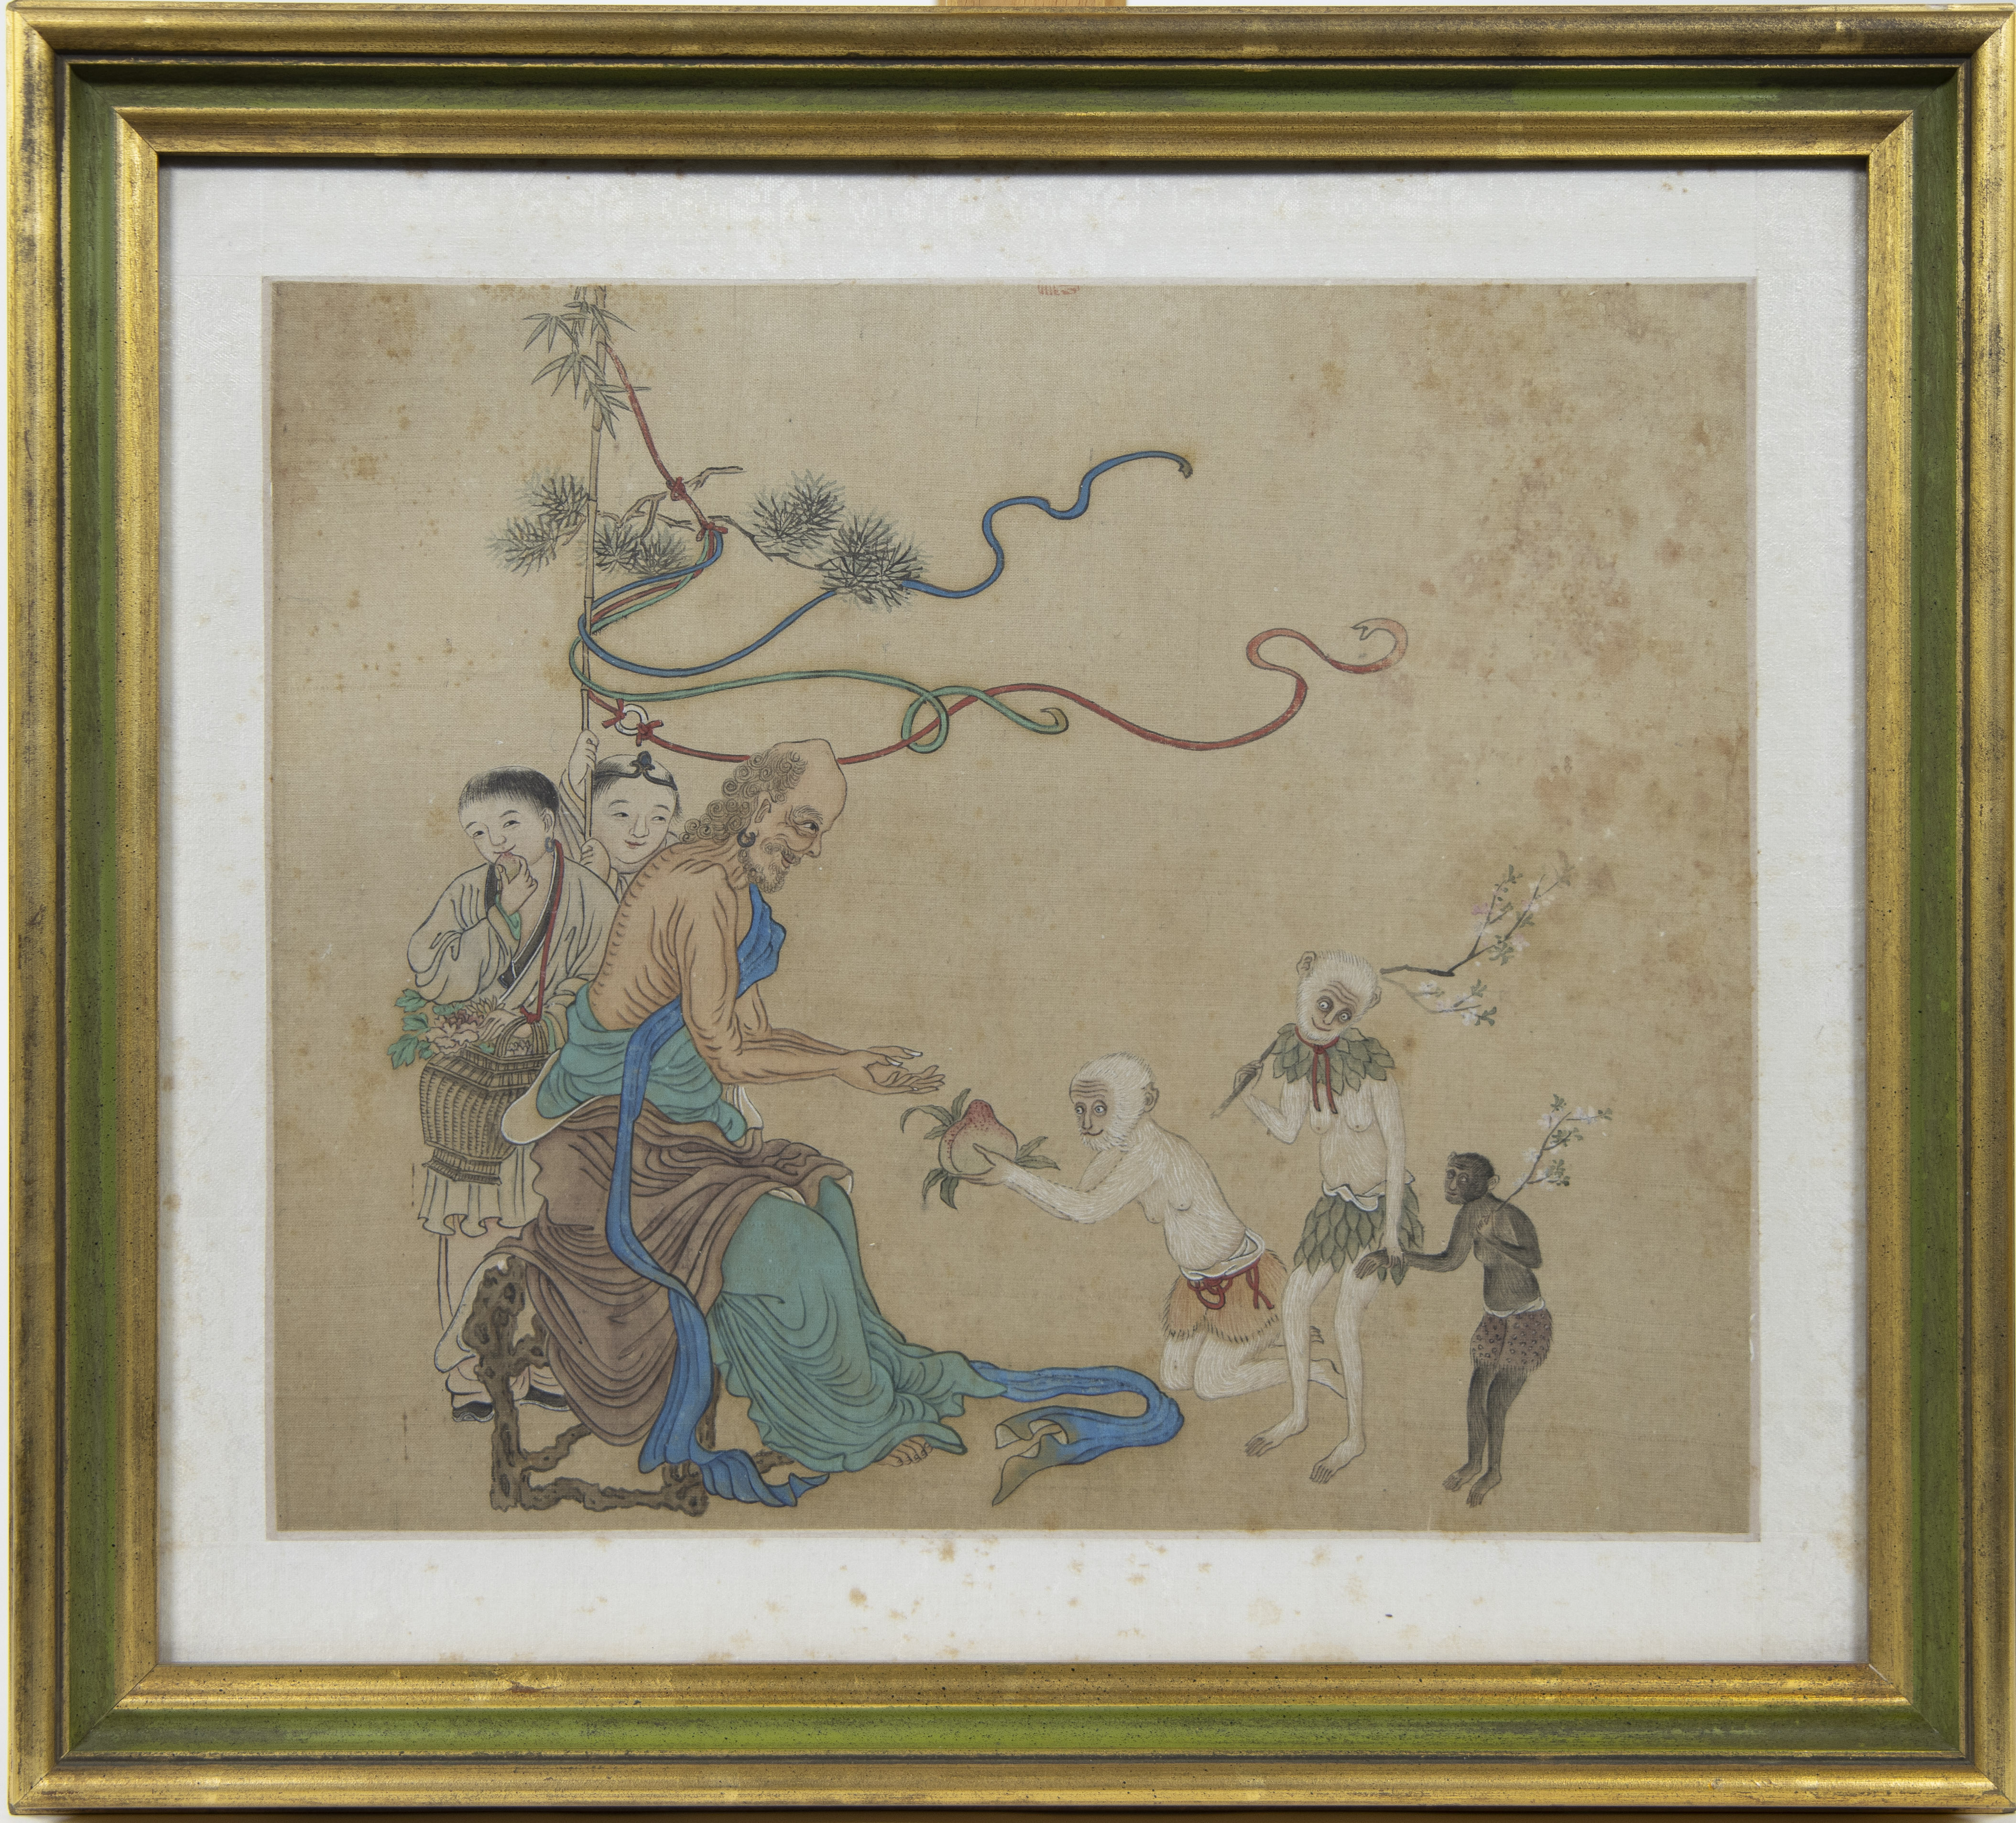 Set of 13 Chinese coloured drawings on silk, 19th century, some are signed - Image 4 of 17